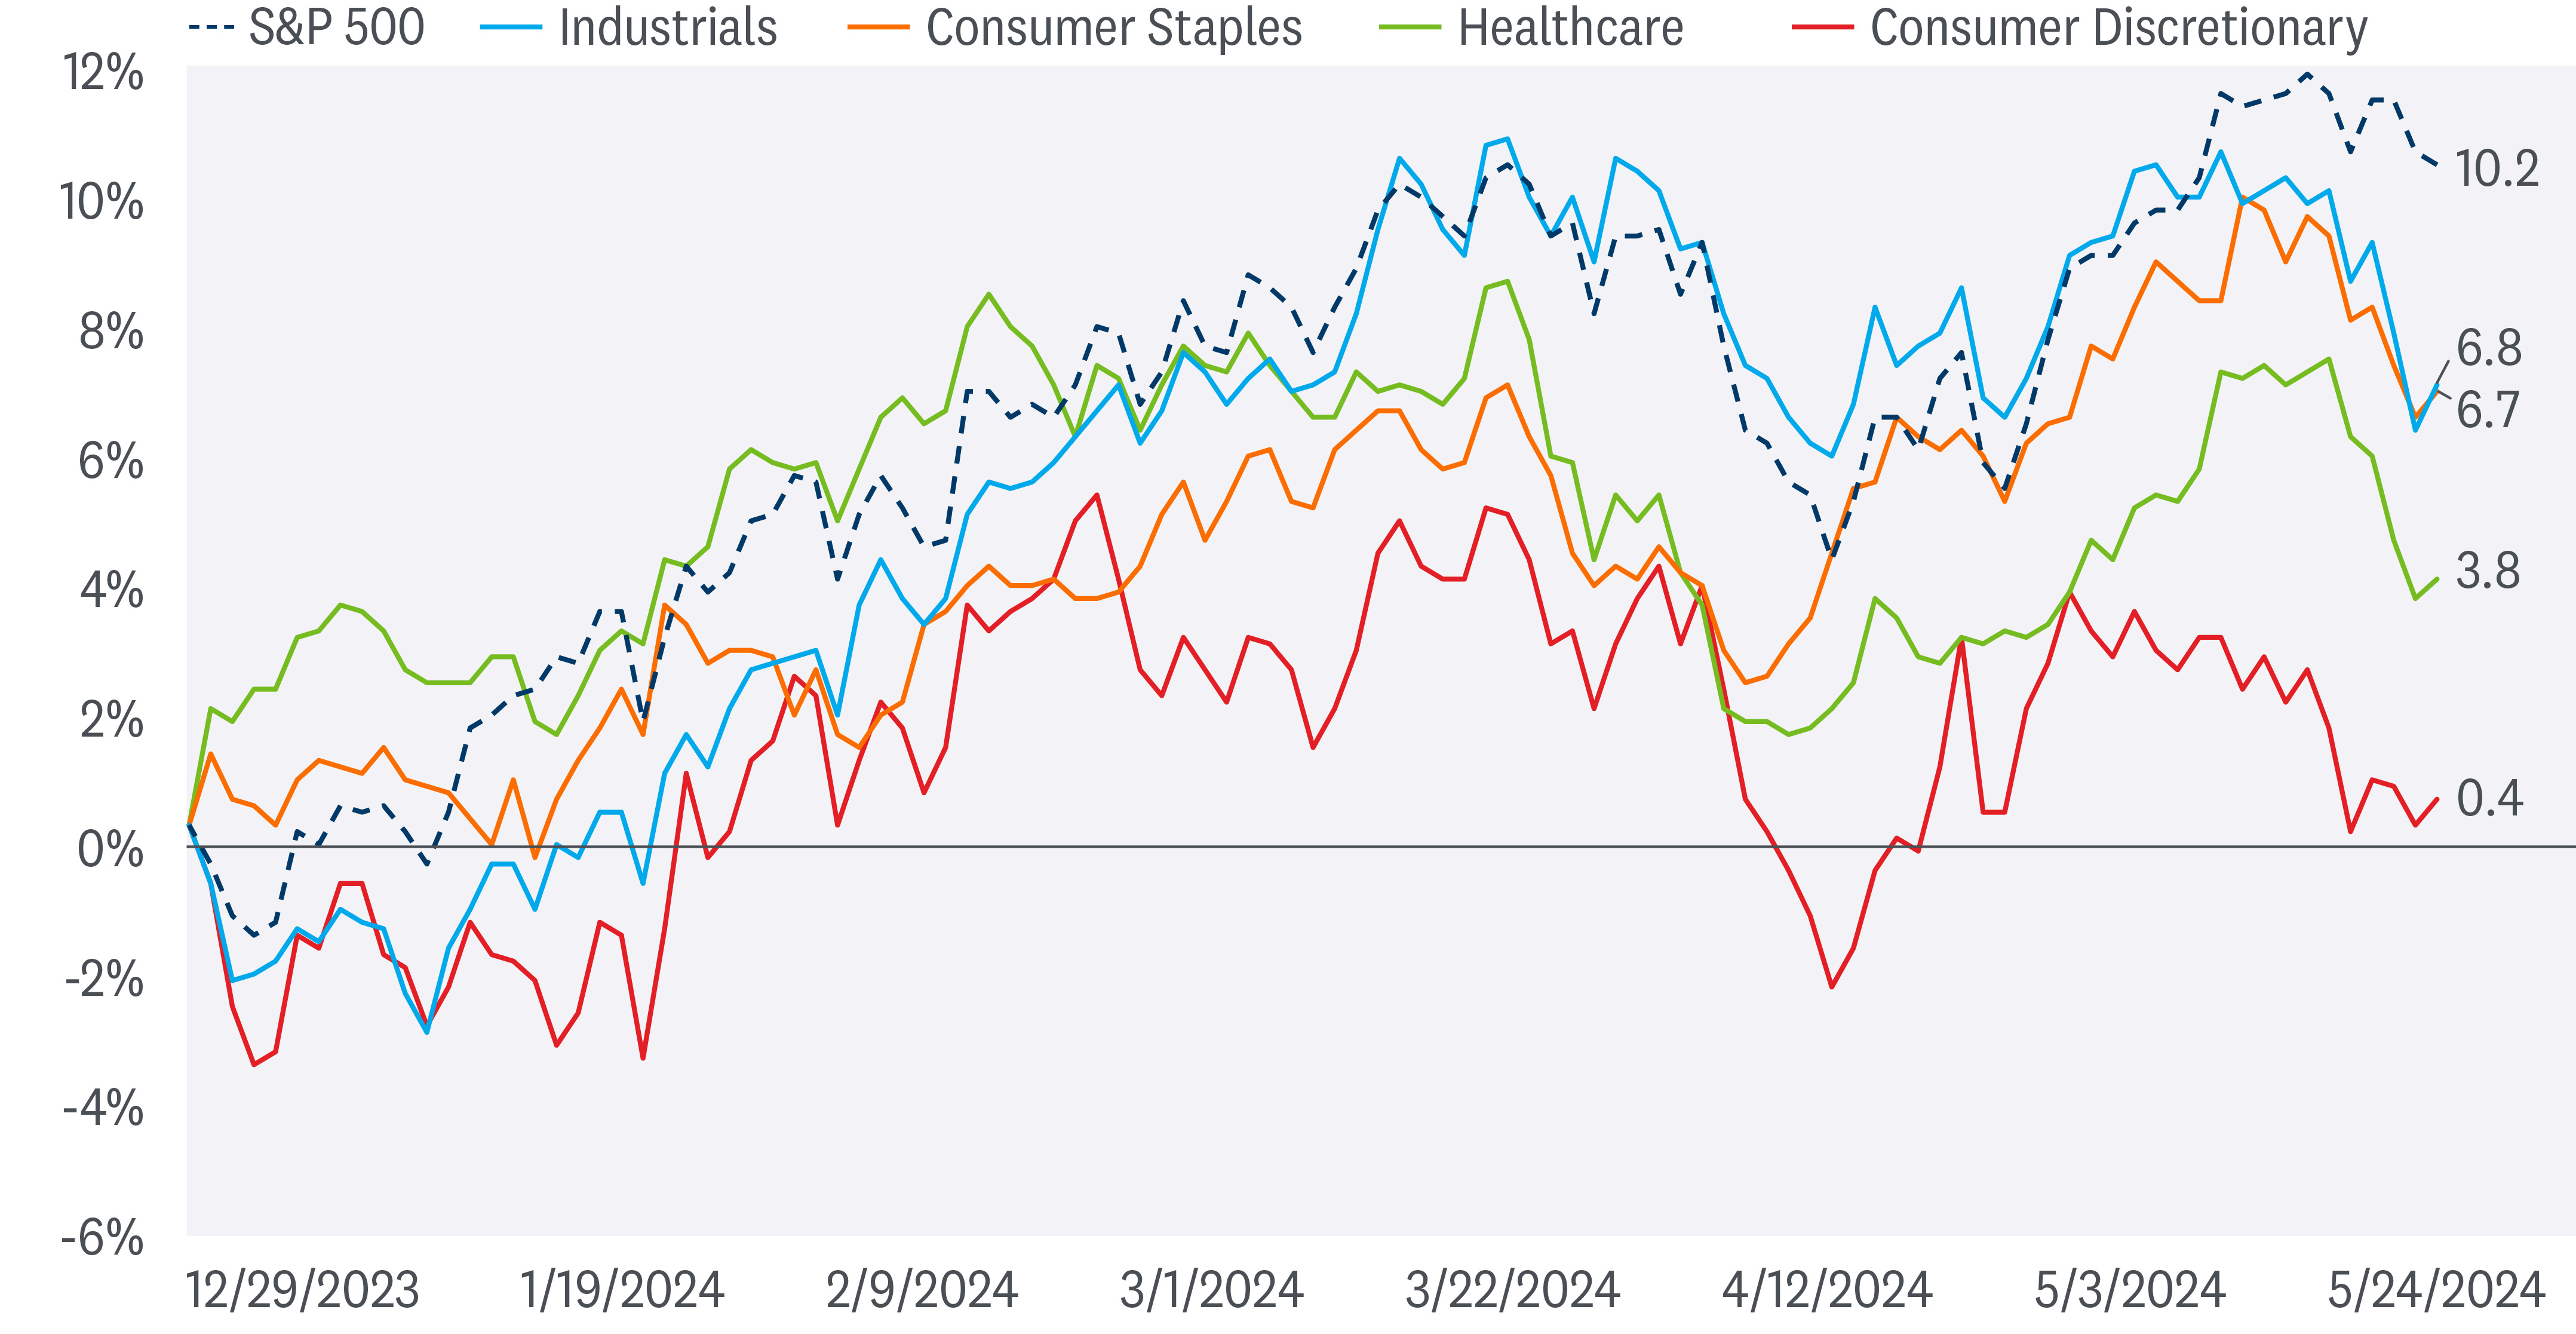 The image shows a line chart with five lines. The lines represent the S&P 500, Industrials, Consumer Staples, Healthcare, and Consumer Discretionary. The x-axis shows the dates (from December 19, 2023 to May 24, 2024), and the y-axis shows the percentage change.  The S&P 500 is the highest line, followed by Industrials, Consumer Staples, Healthcare, and Consumer Discretionary. The S&P 500 has been relatively stable over the past year, while the other indices have experienced more volatility. Consumer Discretionary has been the most volatile index, followed by Healthcare and Consumer Staples. Industrials has been the least volatile index.  All indices are showing a downward trend.